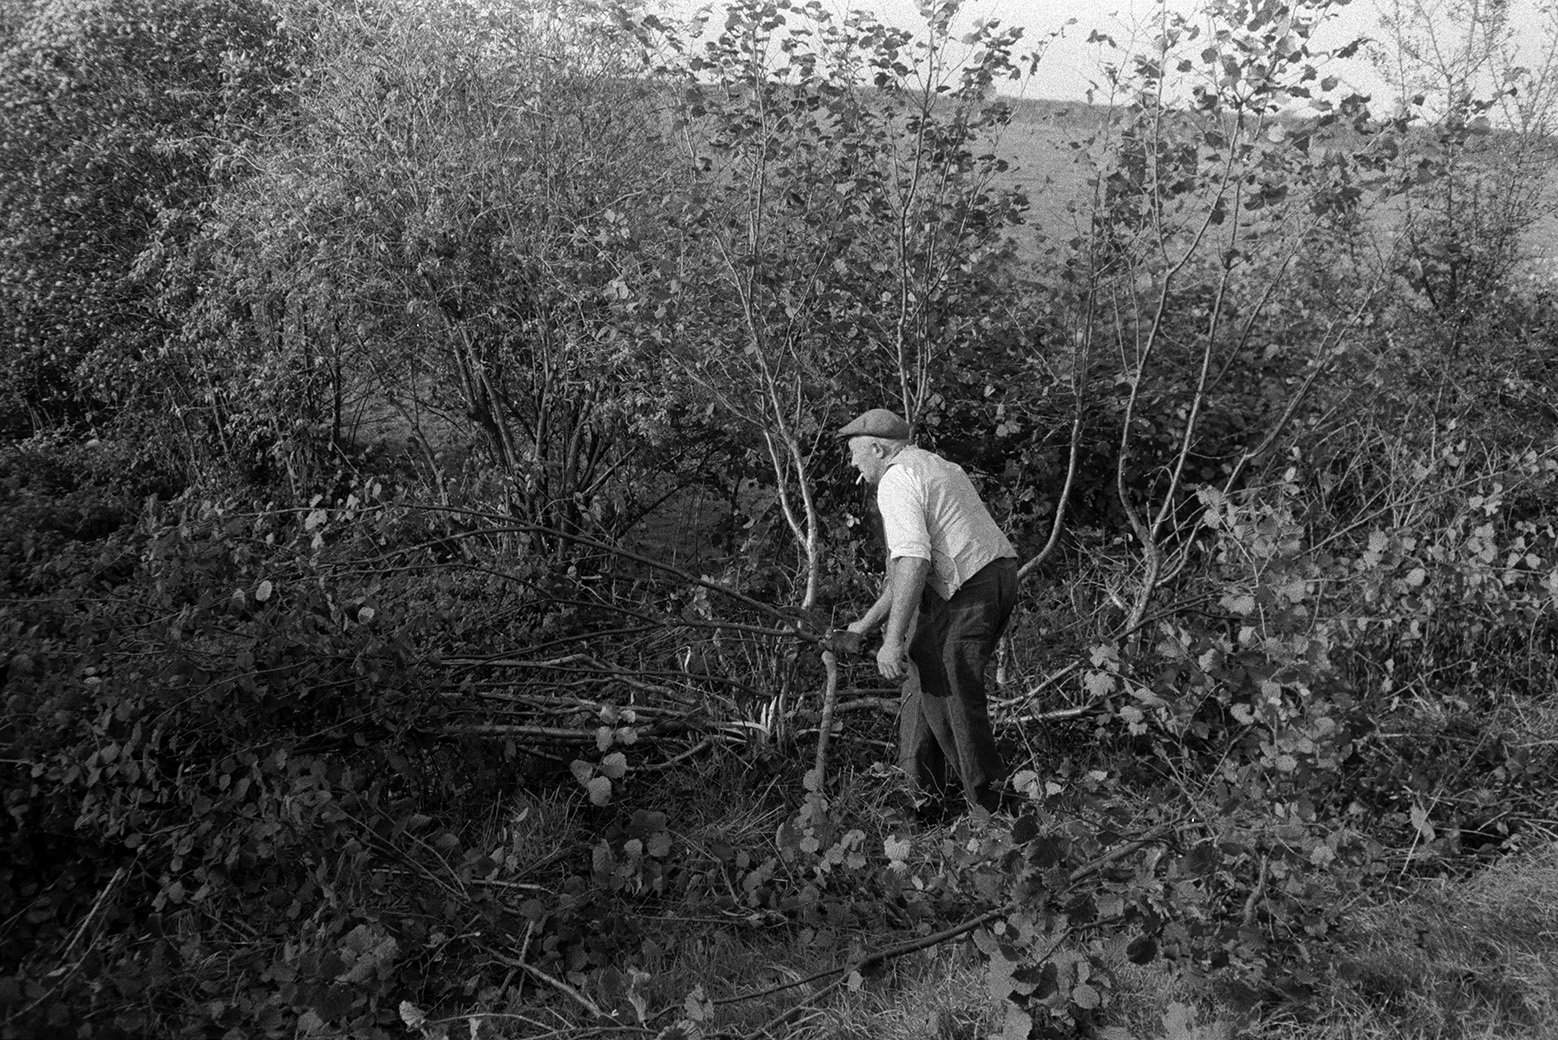 Tom Hooper laying a hedge in a field at Beaford. He is using a bill hook to cut the branches. He is also smoking a cigarette.